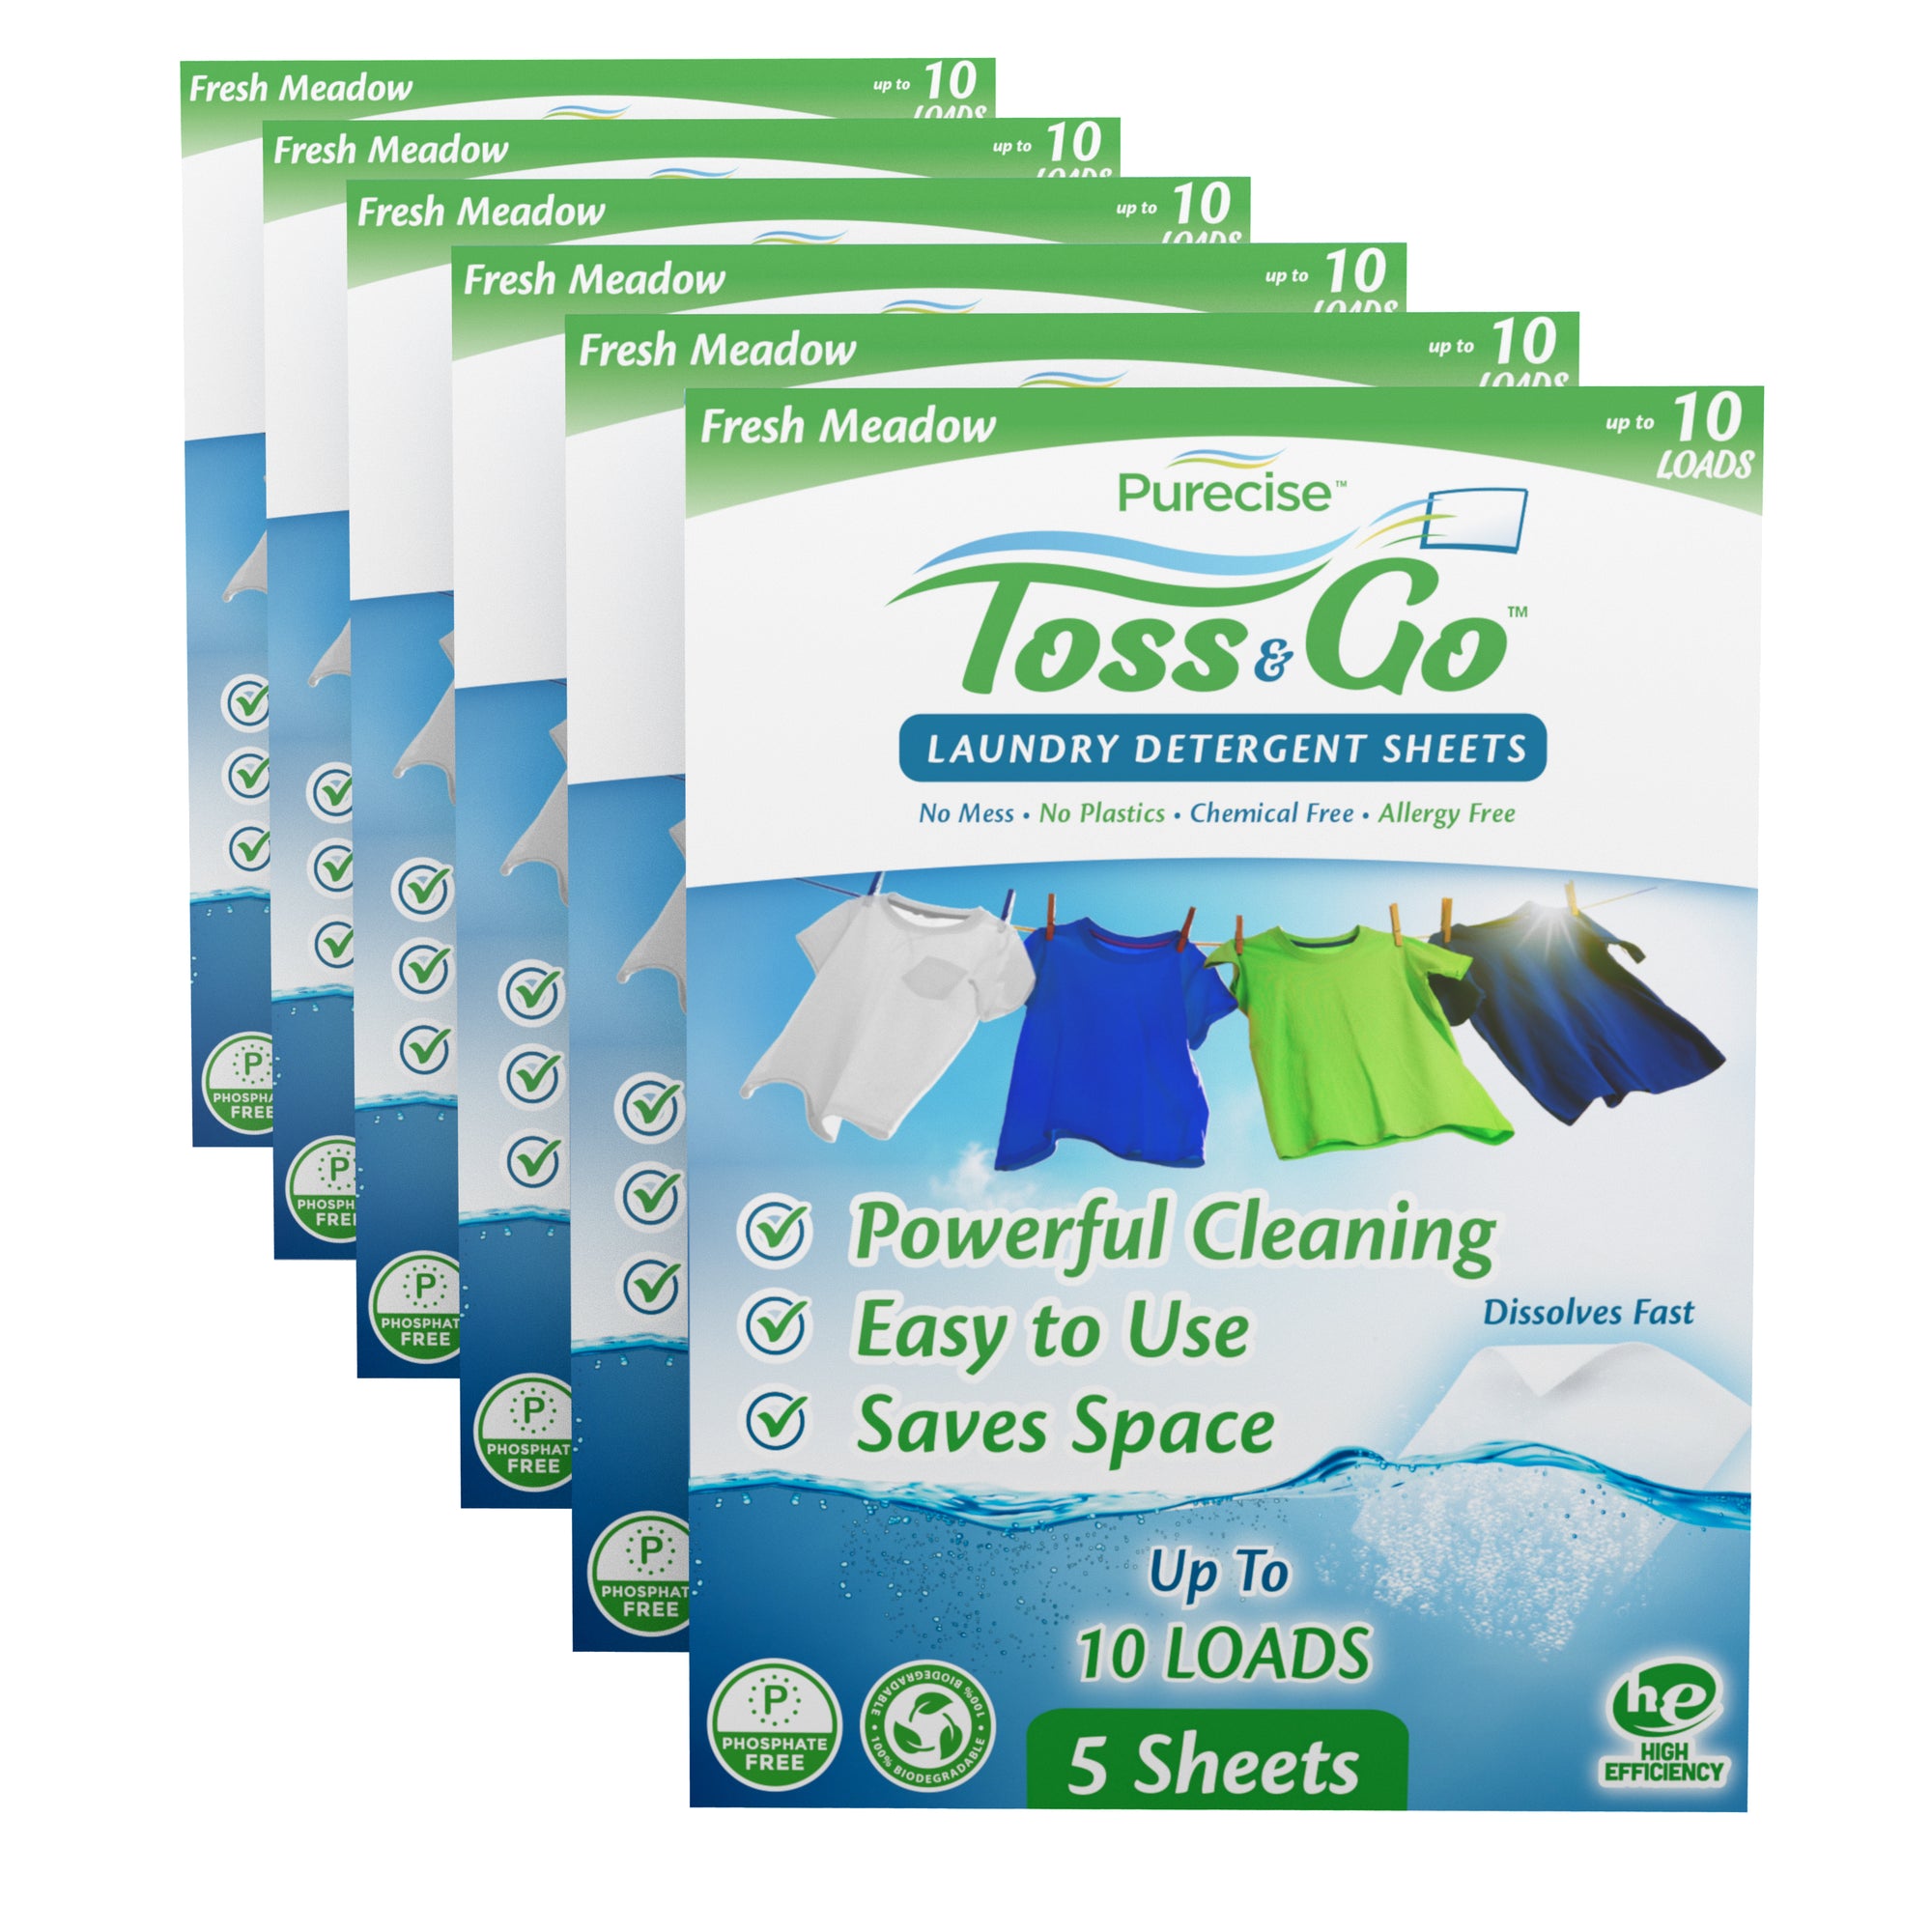 Toss & Go Laundry Detergent Sheets Six Pack (Up To 60 Loads)